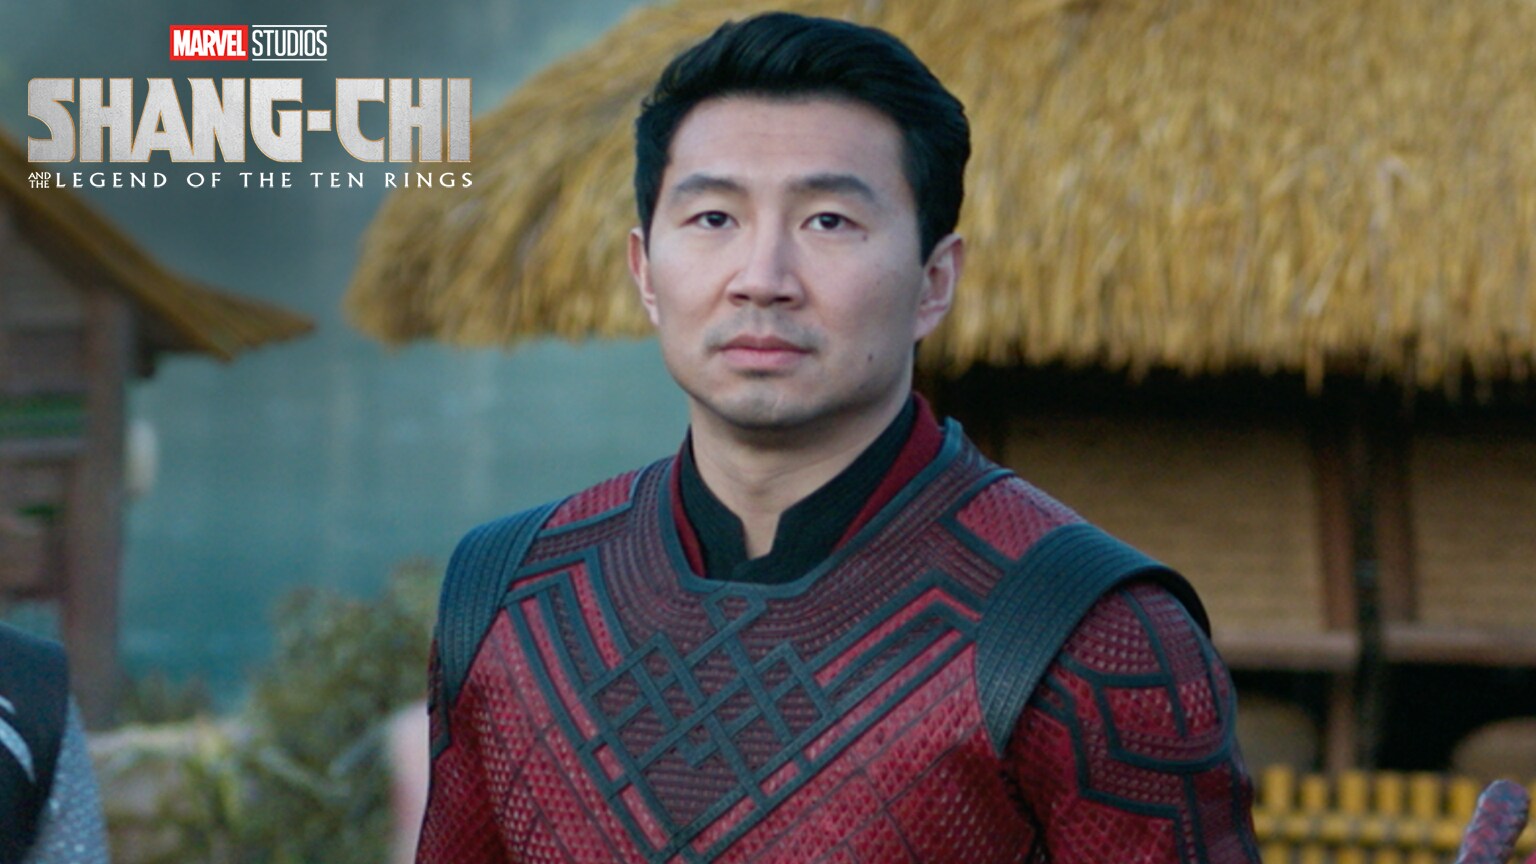 Shang-Chi and the Legend of the Ten Rings' actor to give CU talk Feb. 23, CU Boulder Today